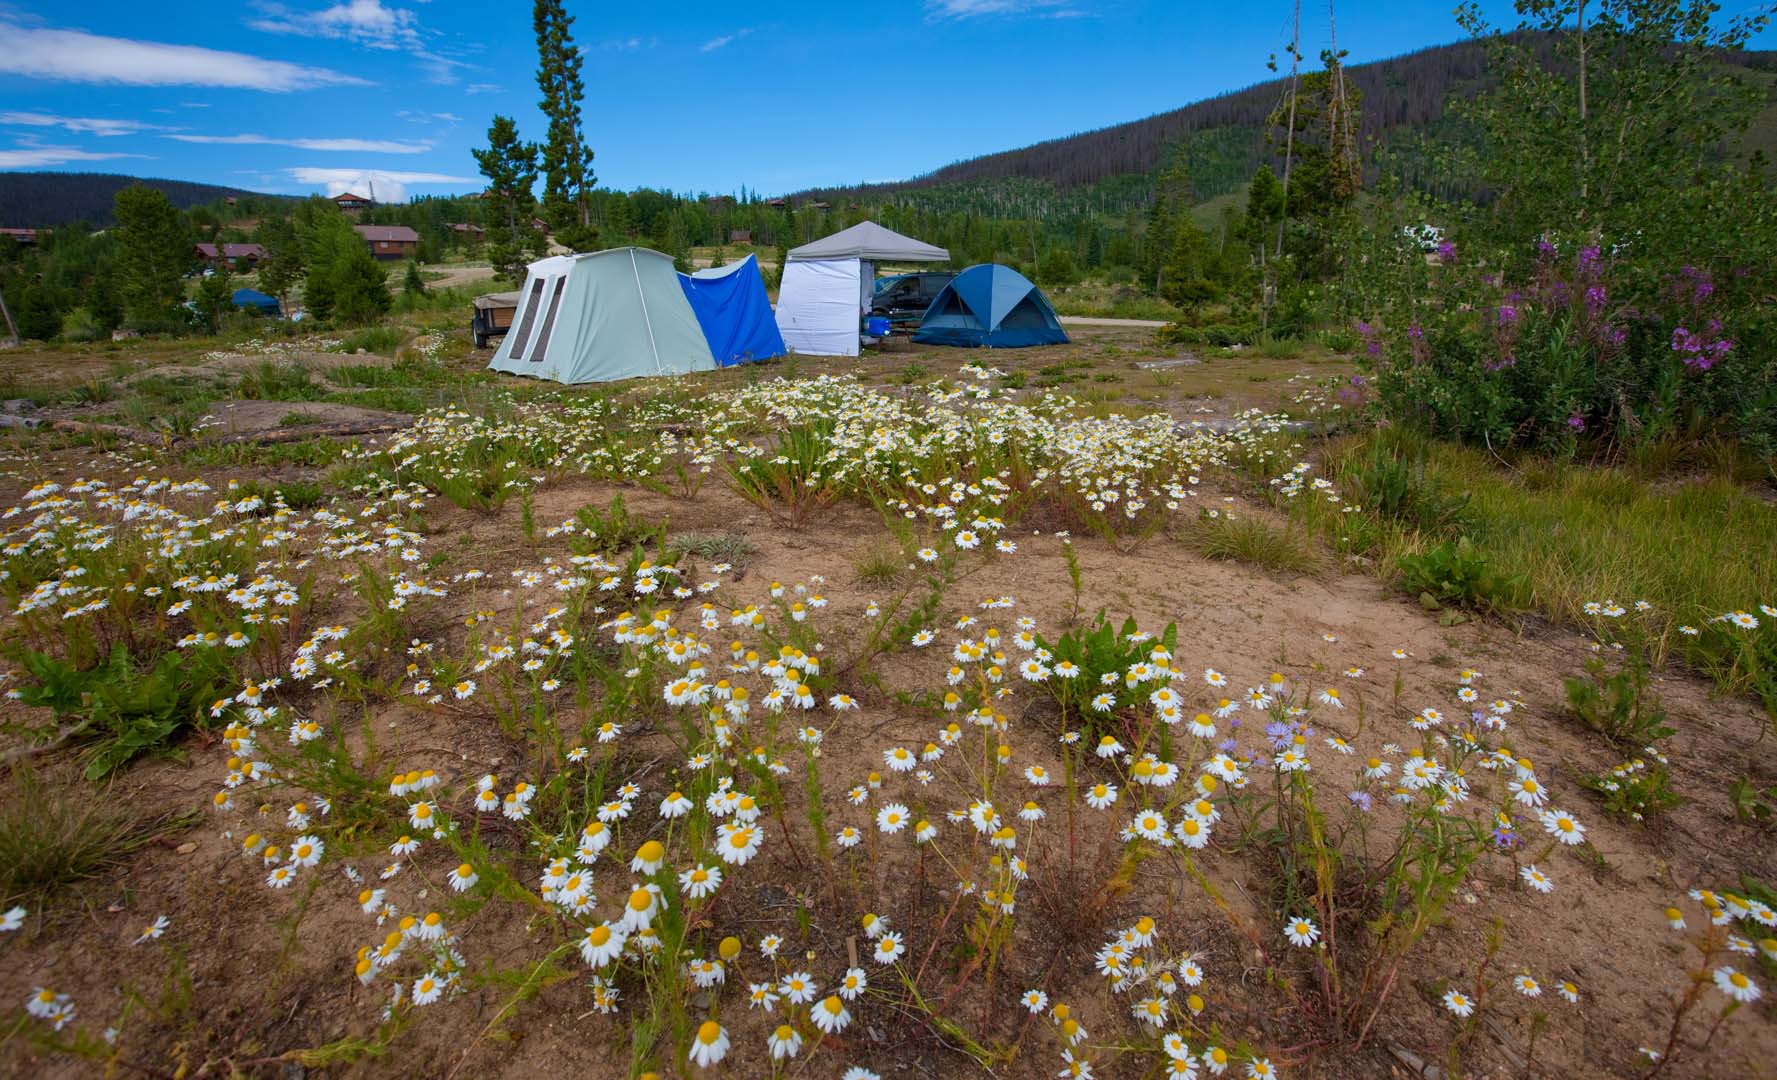 scott pope campground with camps set up and wild flowers